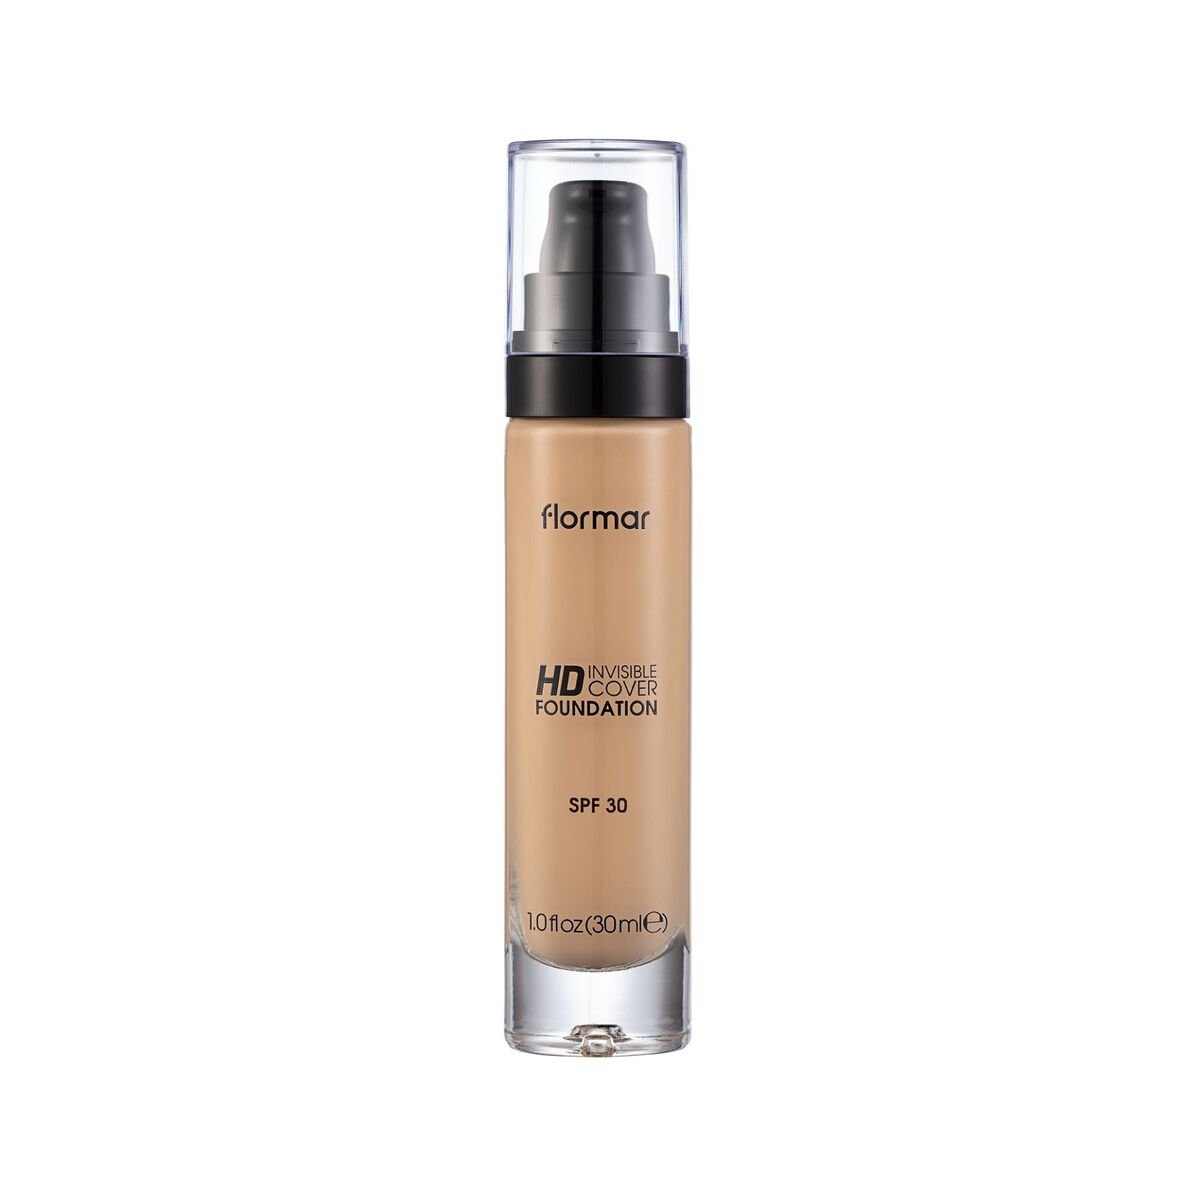 Flormar Foundation HD Invisible Cover, Ivory